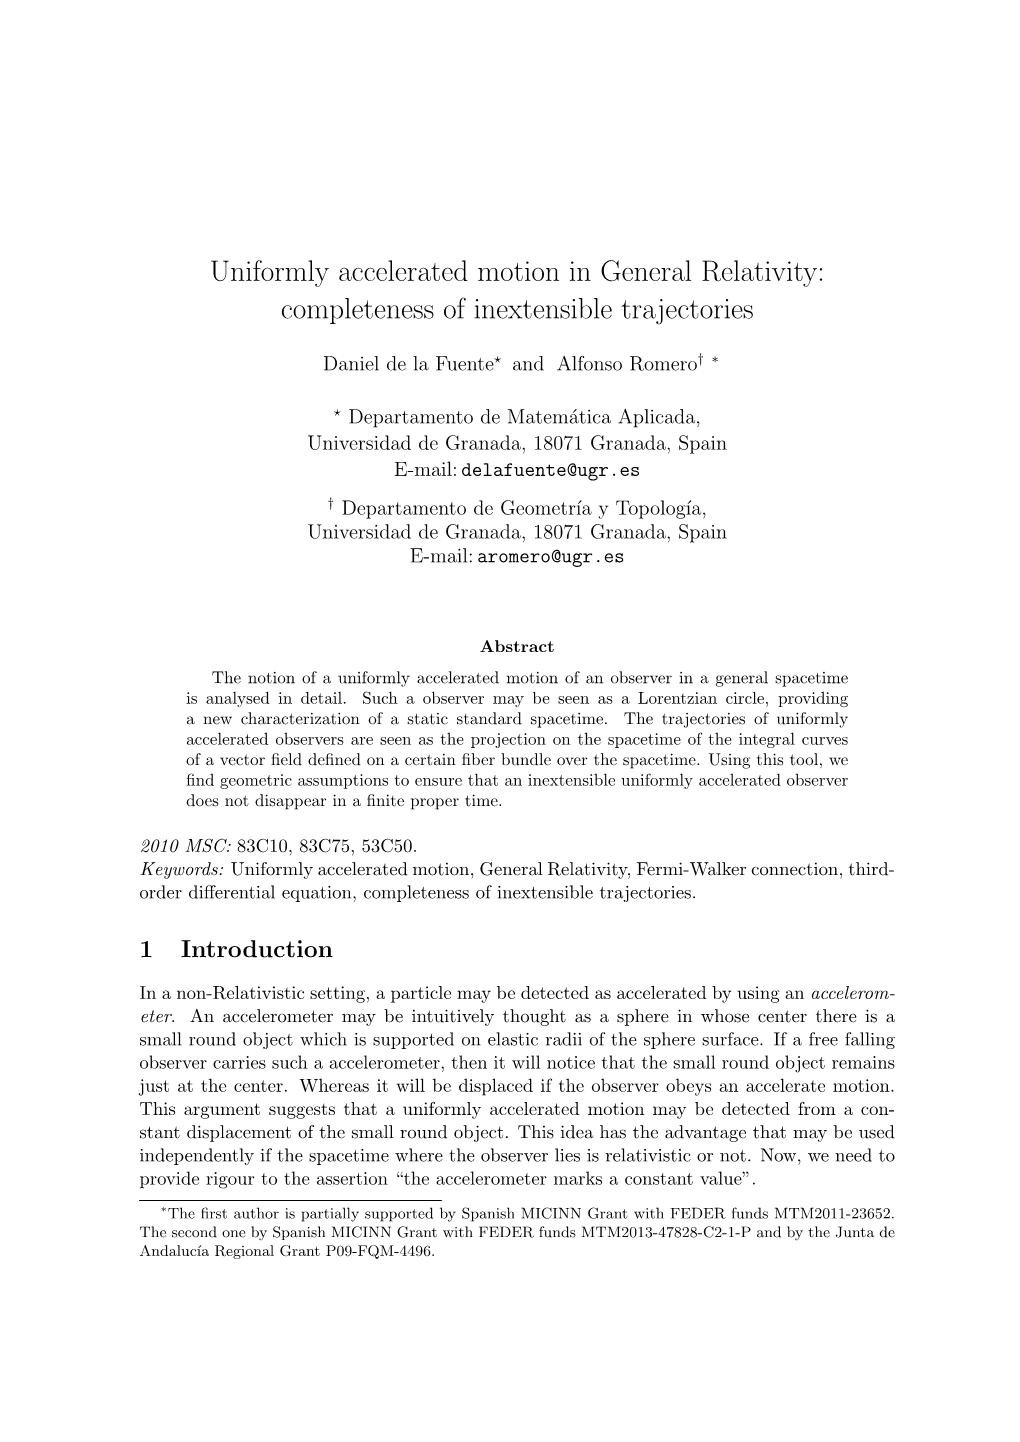 Uniformly Accelerated Motion in General Relativity: Completeness of Inextensible Trajectories